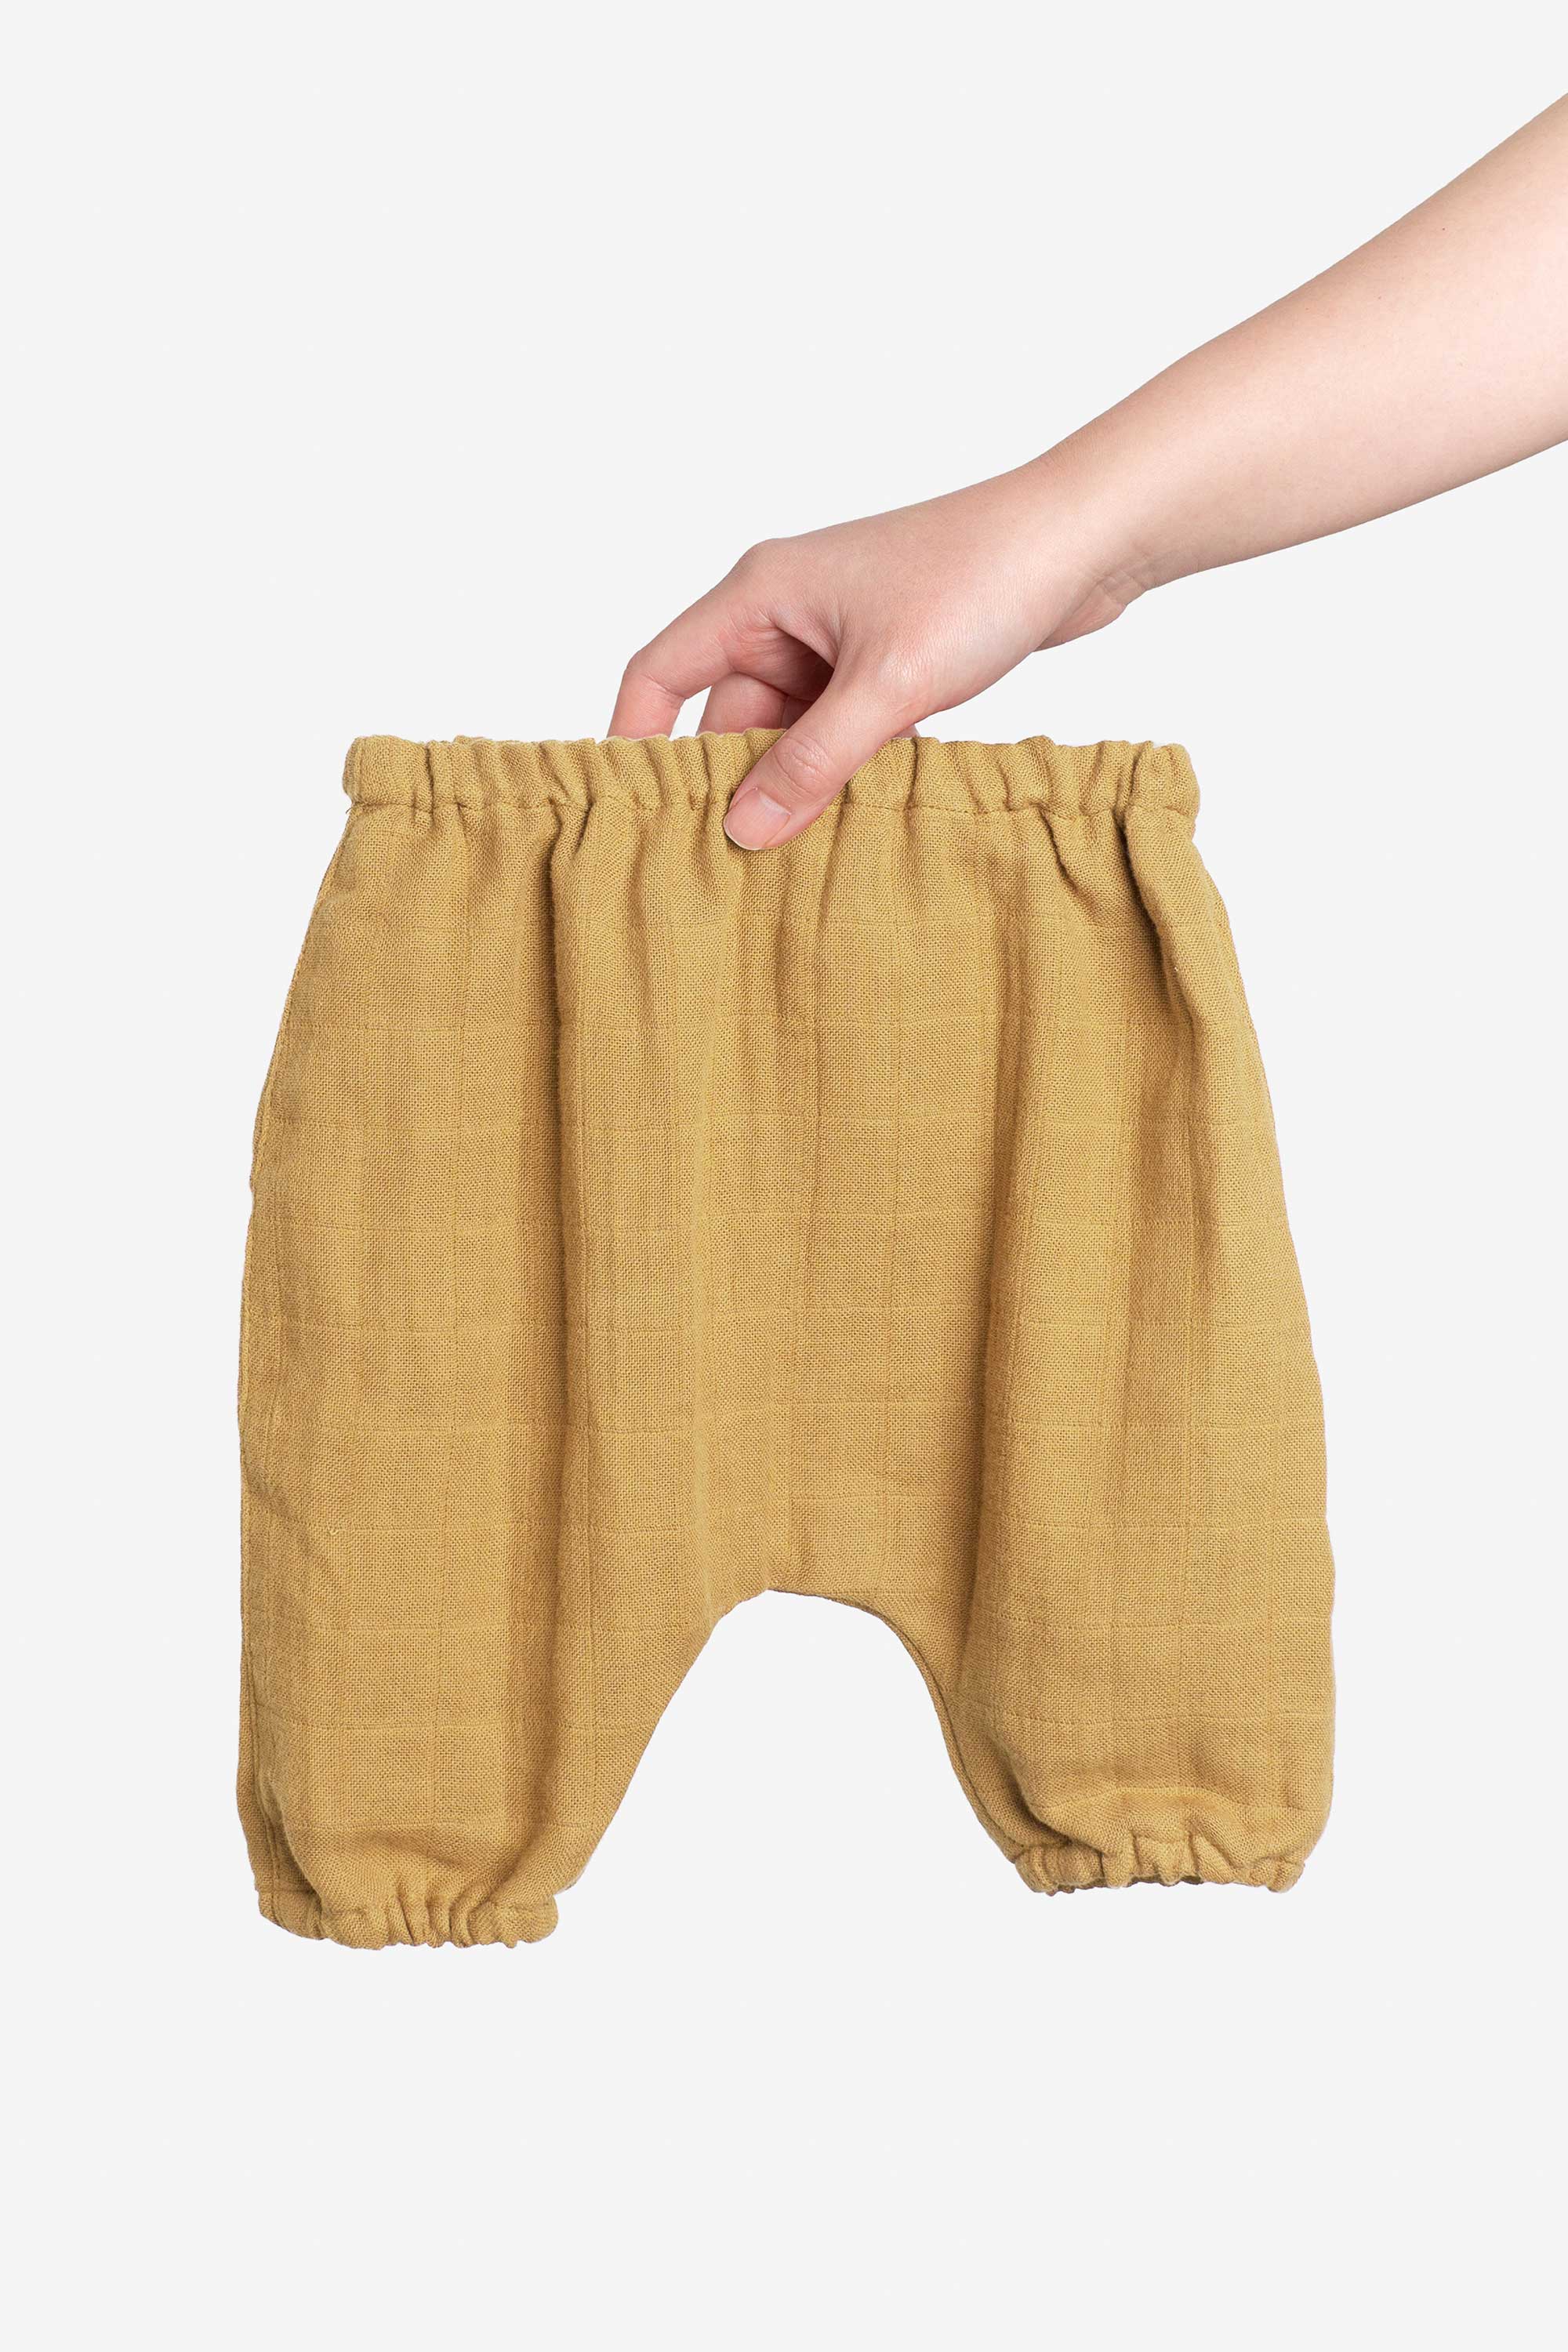 Baby and Toddler Harem Pants – 5 colours available